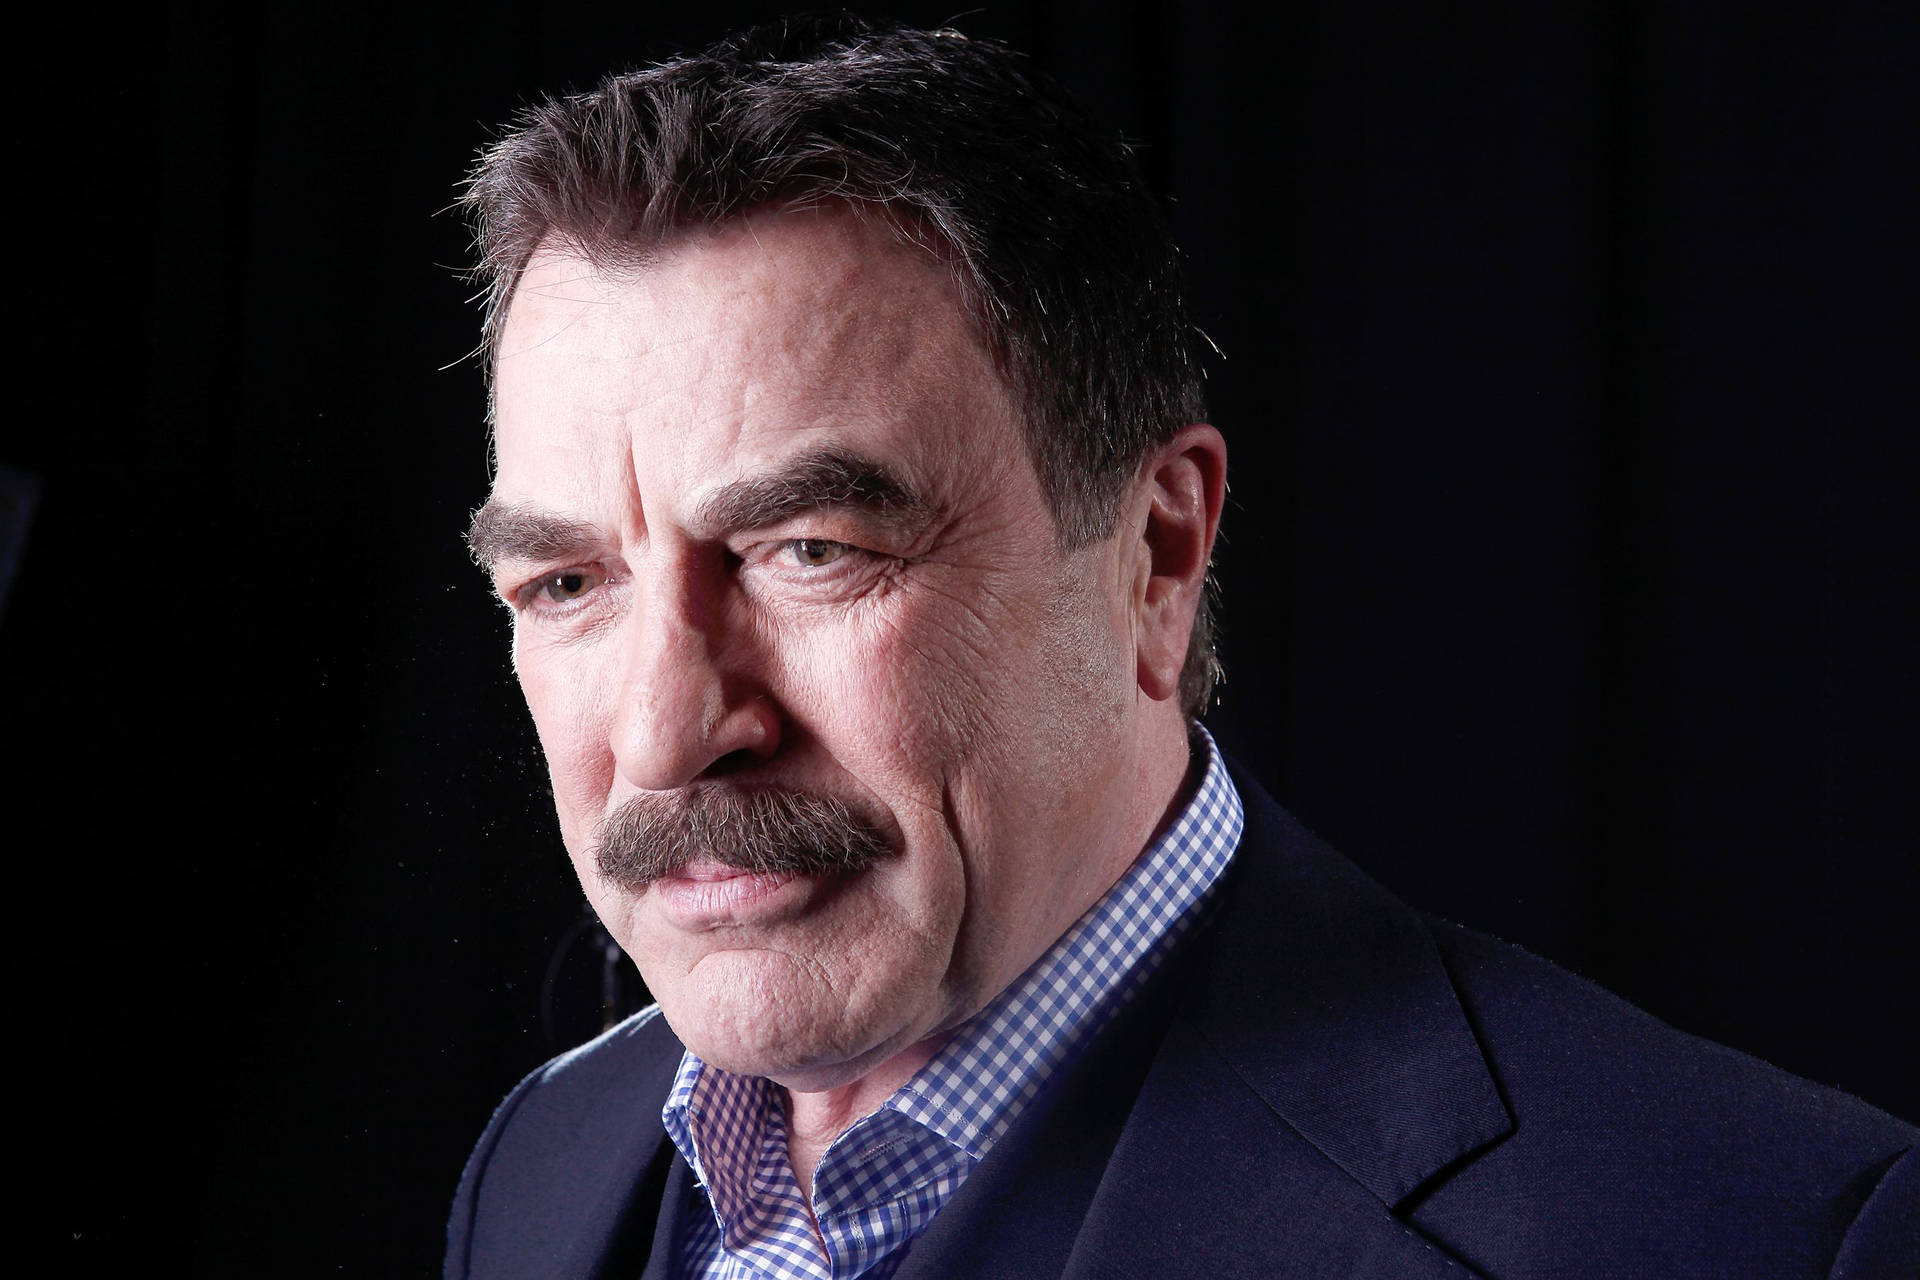 Tom Selleck Formal Corporate Profile Photography Wallpaper